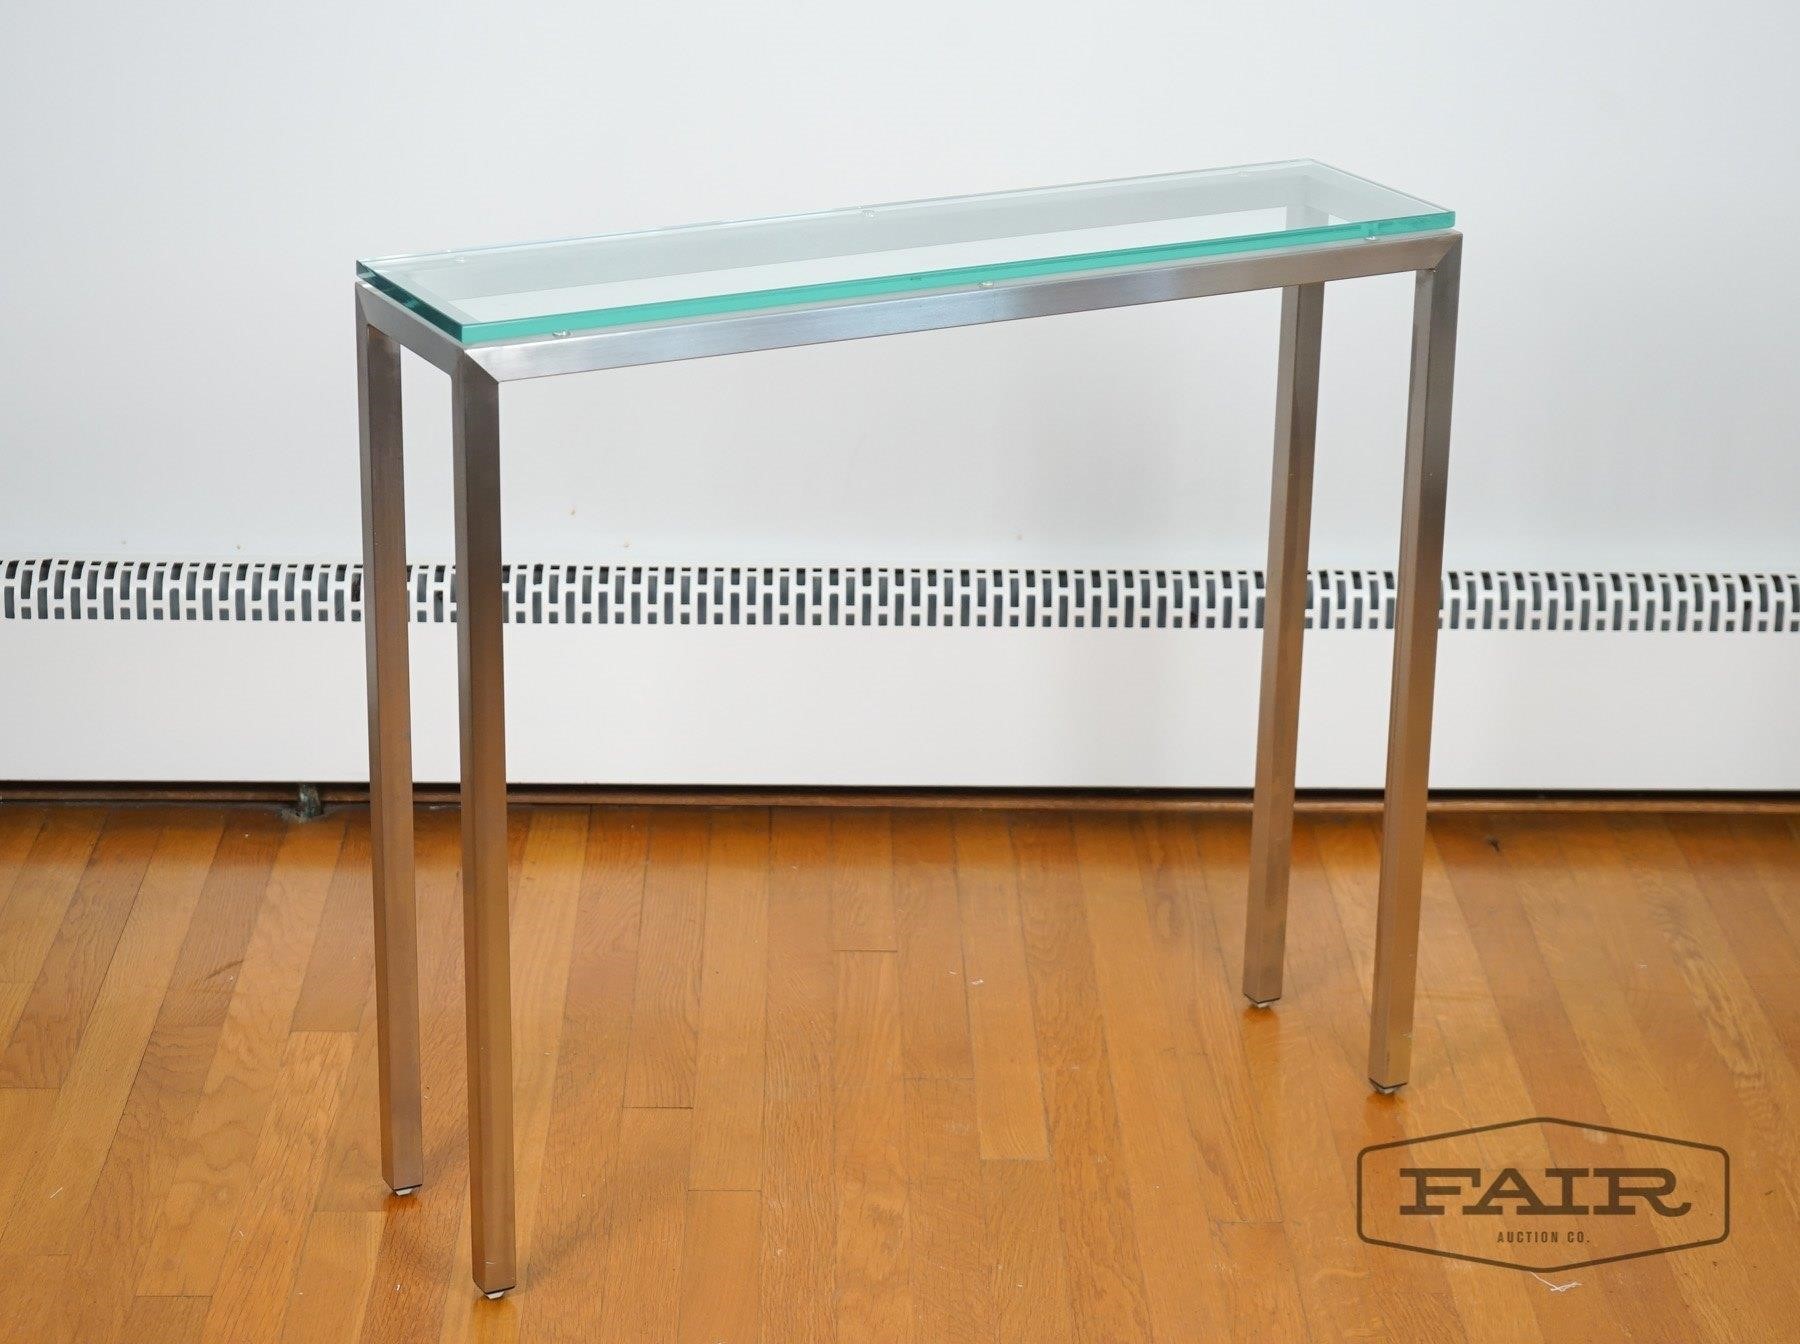 Room And Board Glass Console Table Fair Auction Company Llc